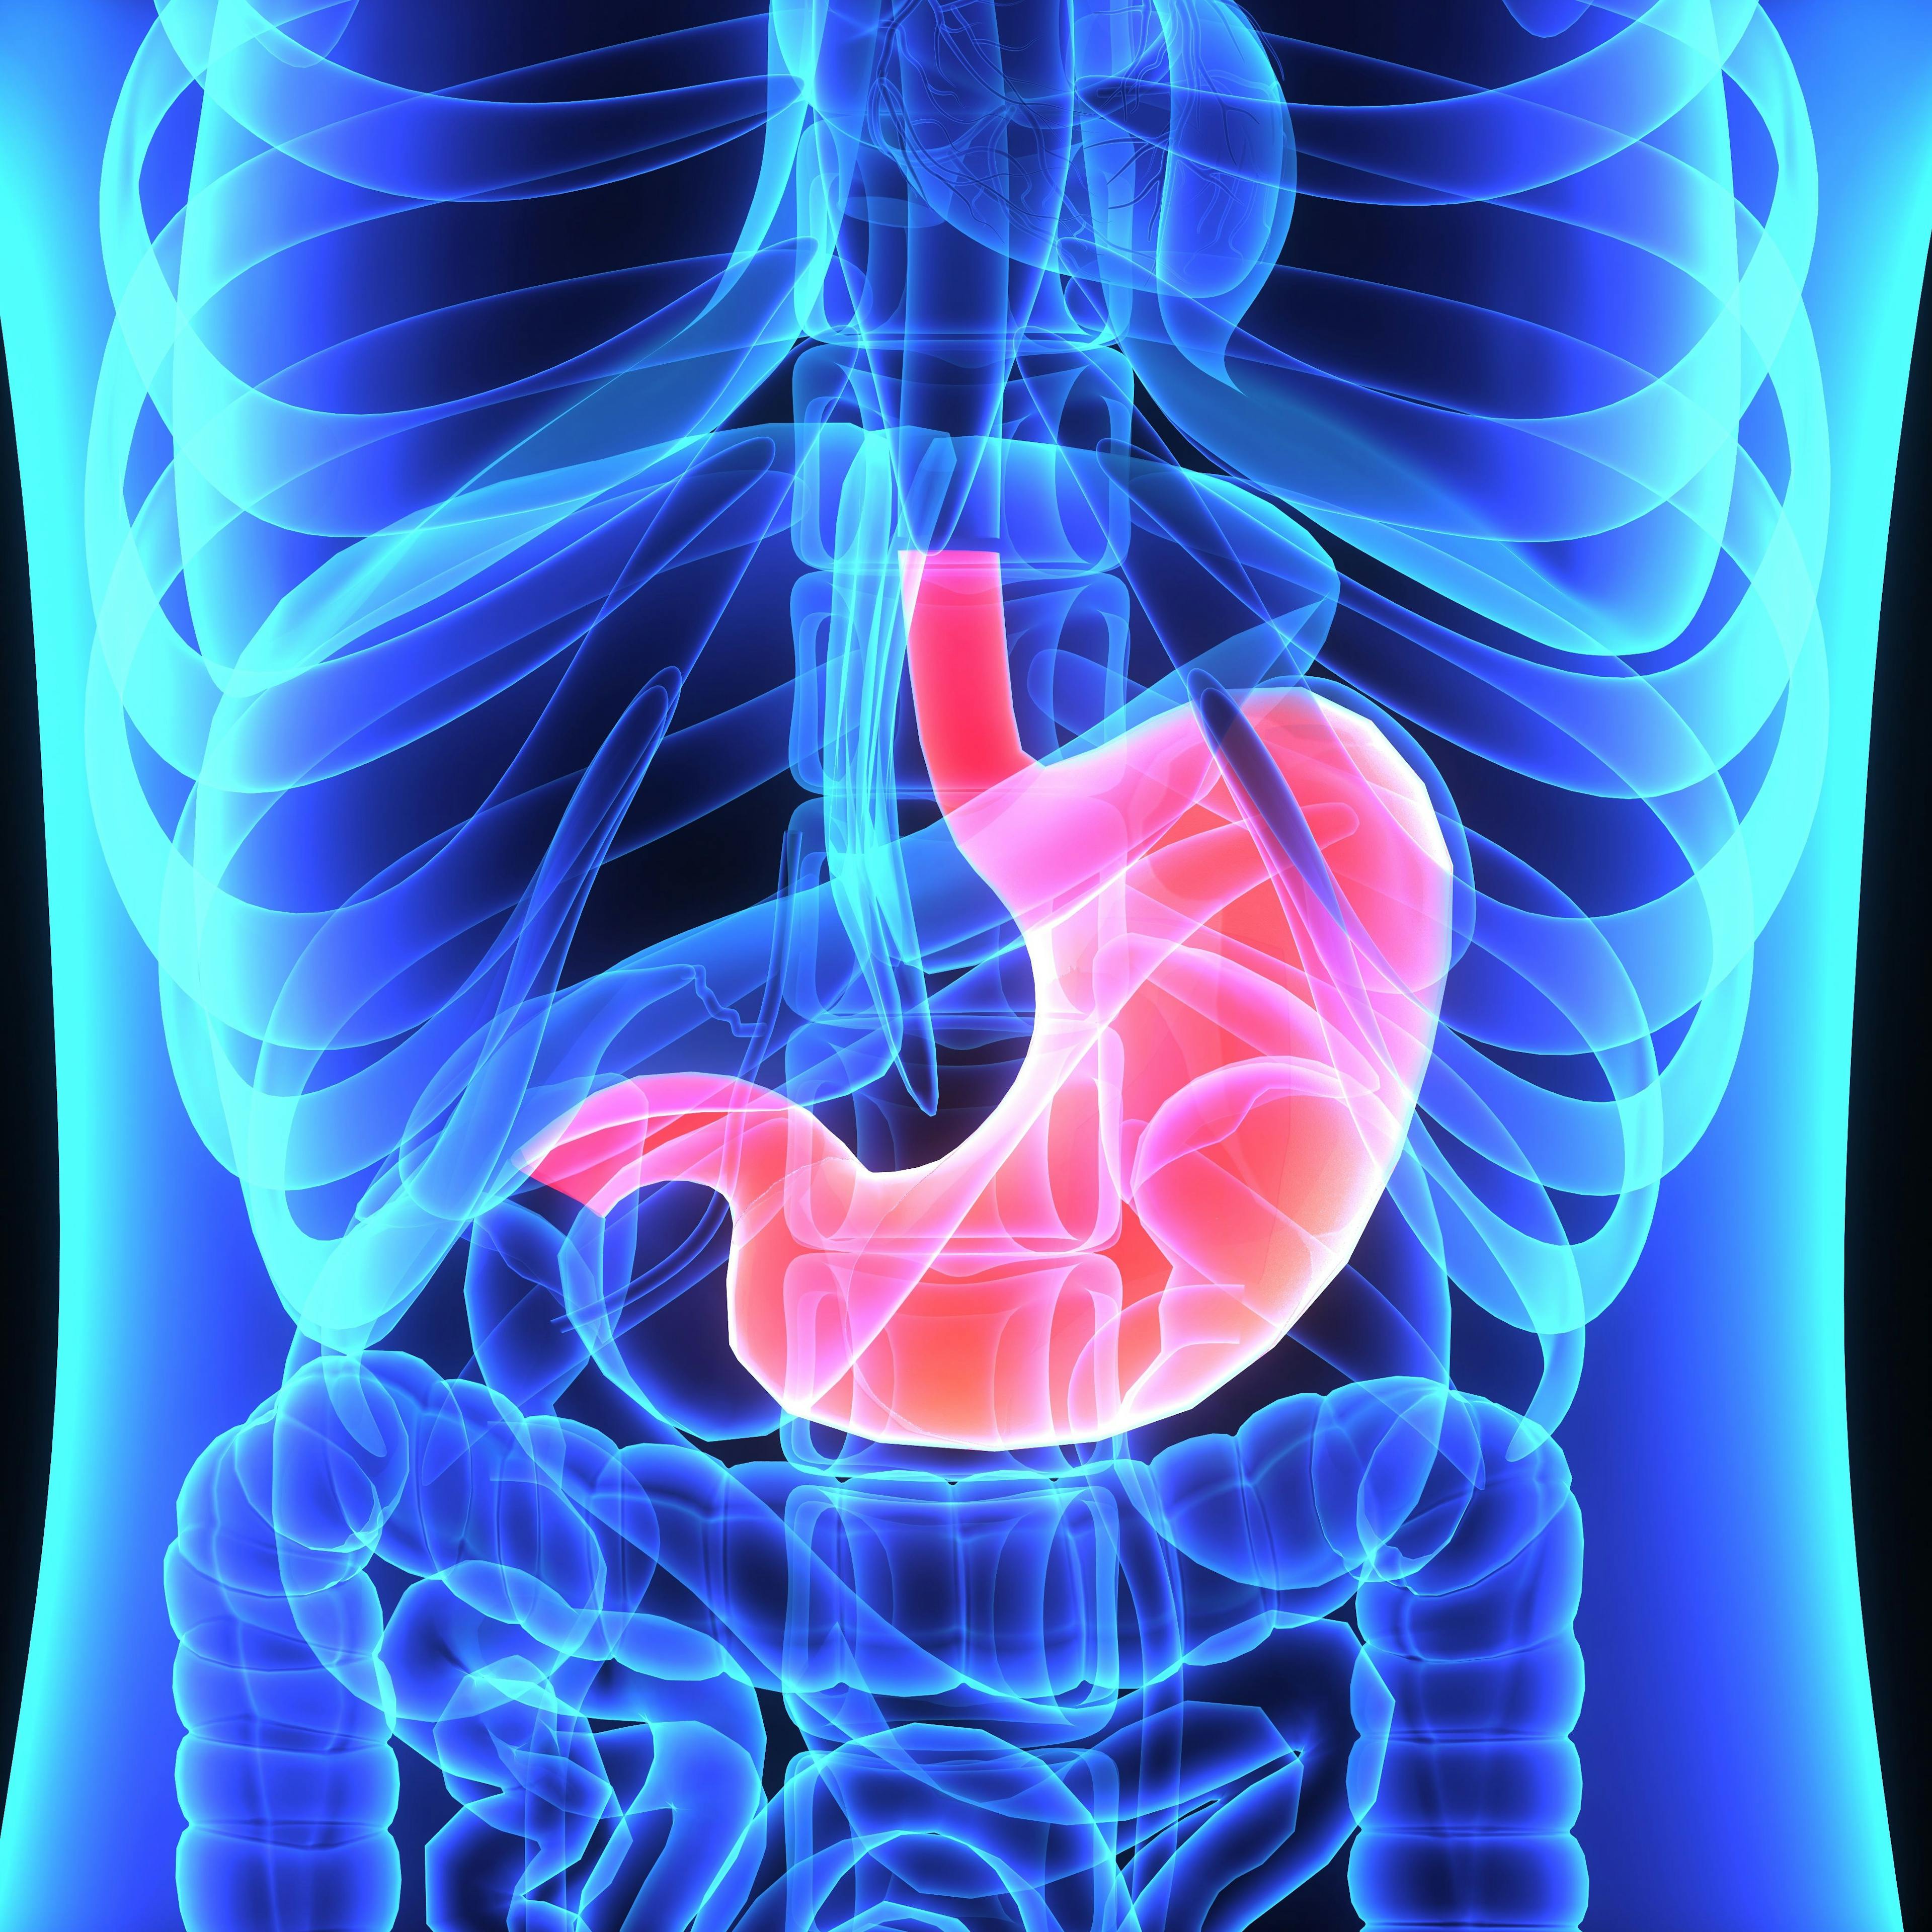 Combining regorafenib with nivolumab and chemotherapy appears to improve progression free survival at 6 months among those with advanced esophagogastric adenocarcinoma.